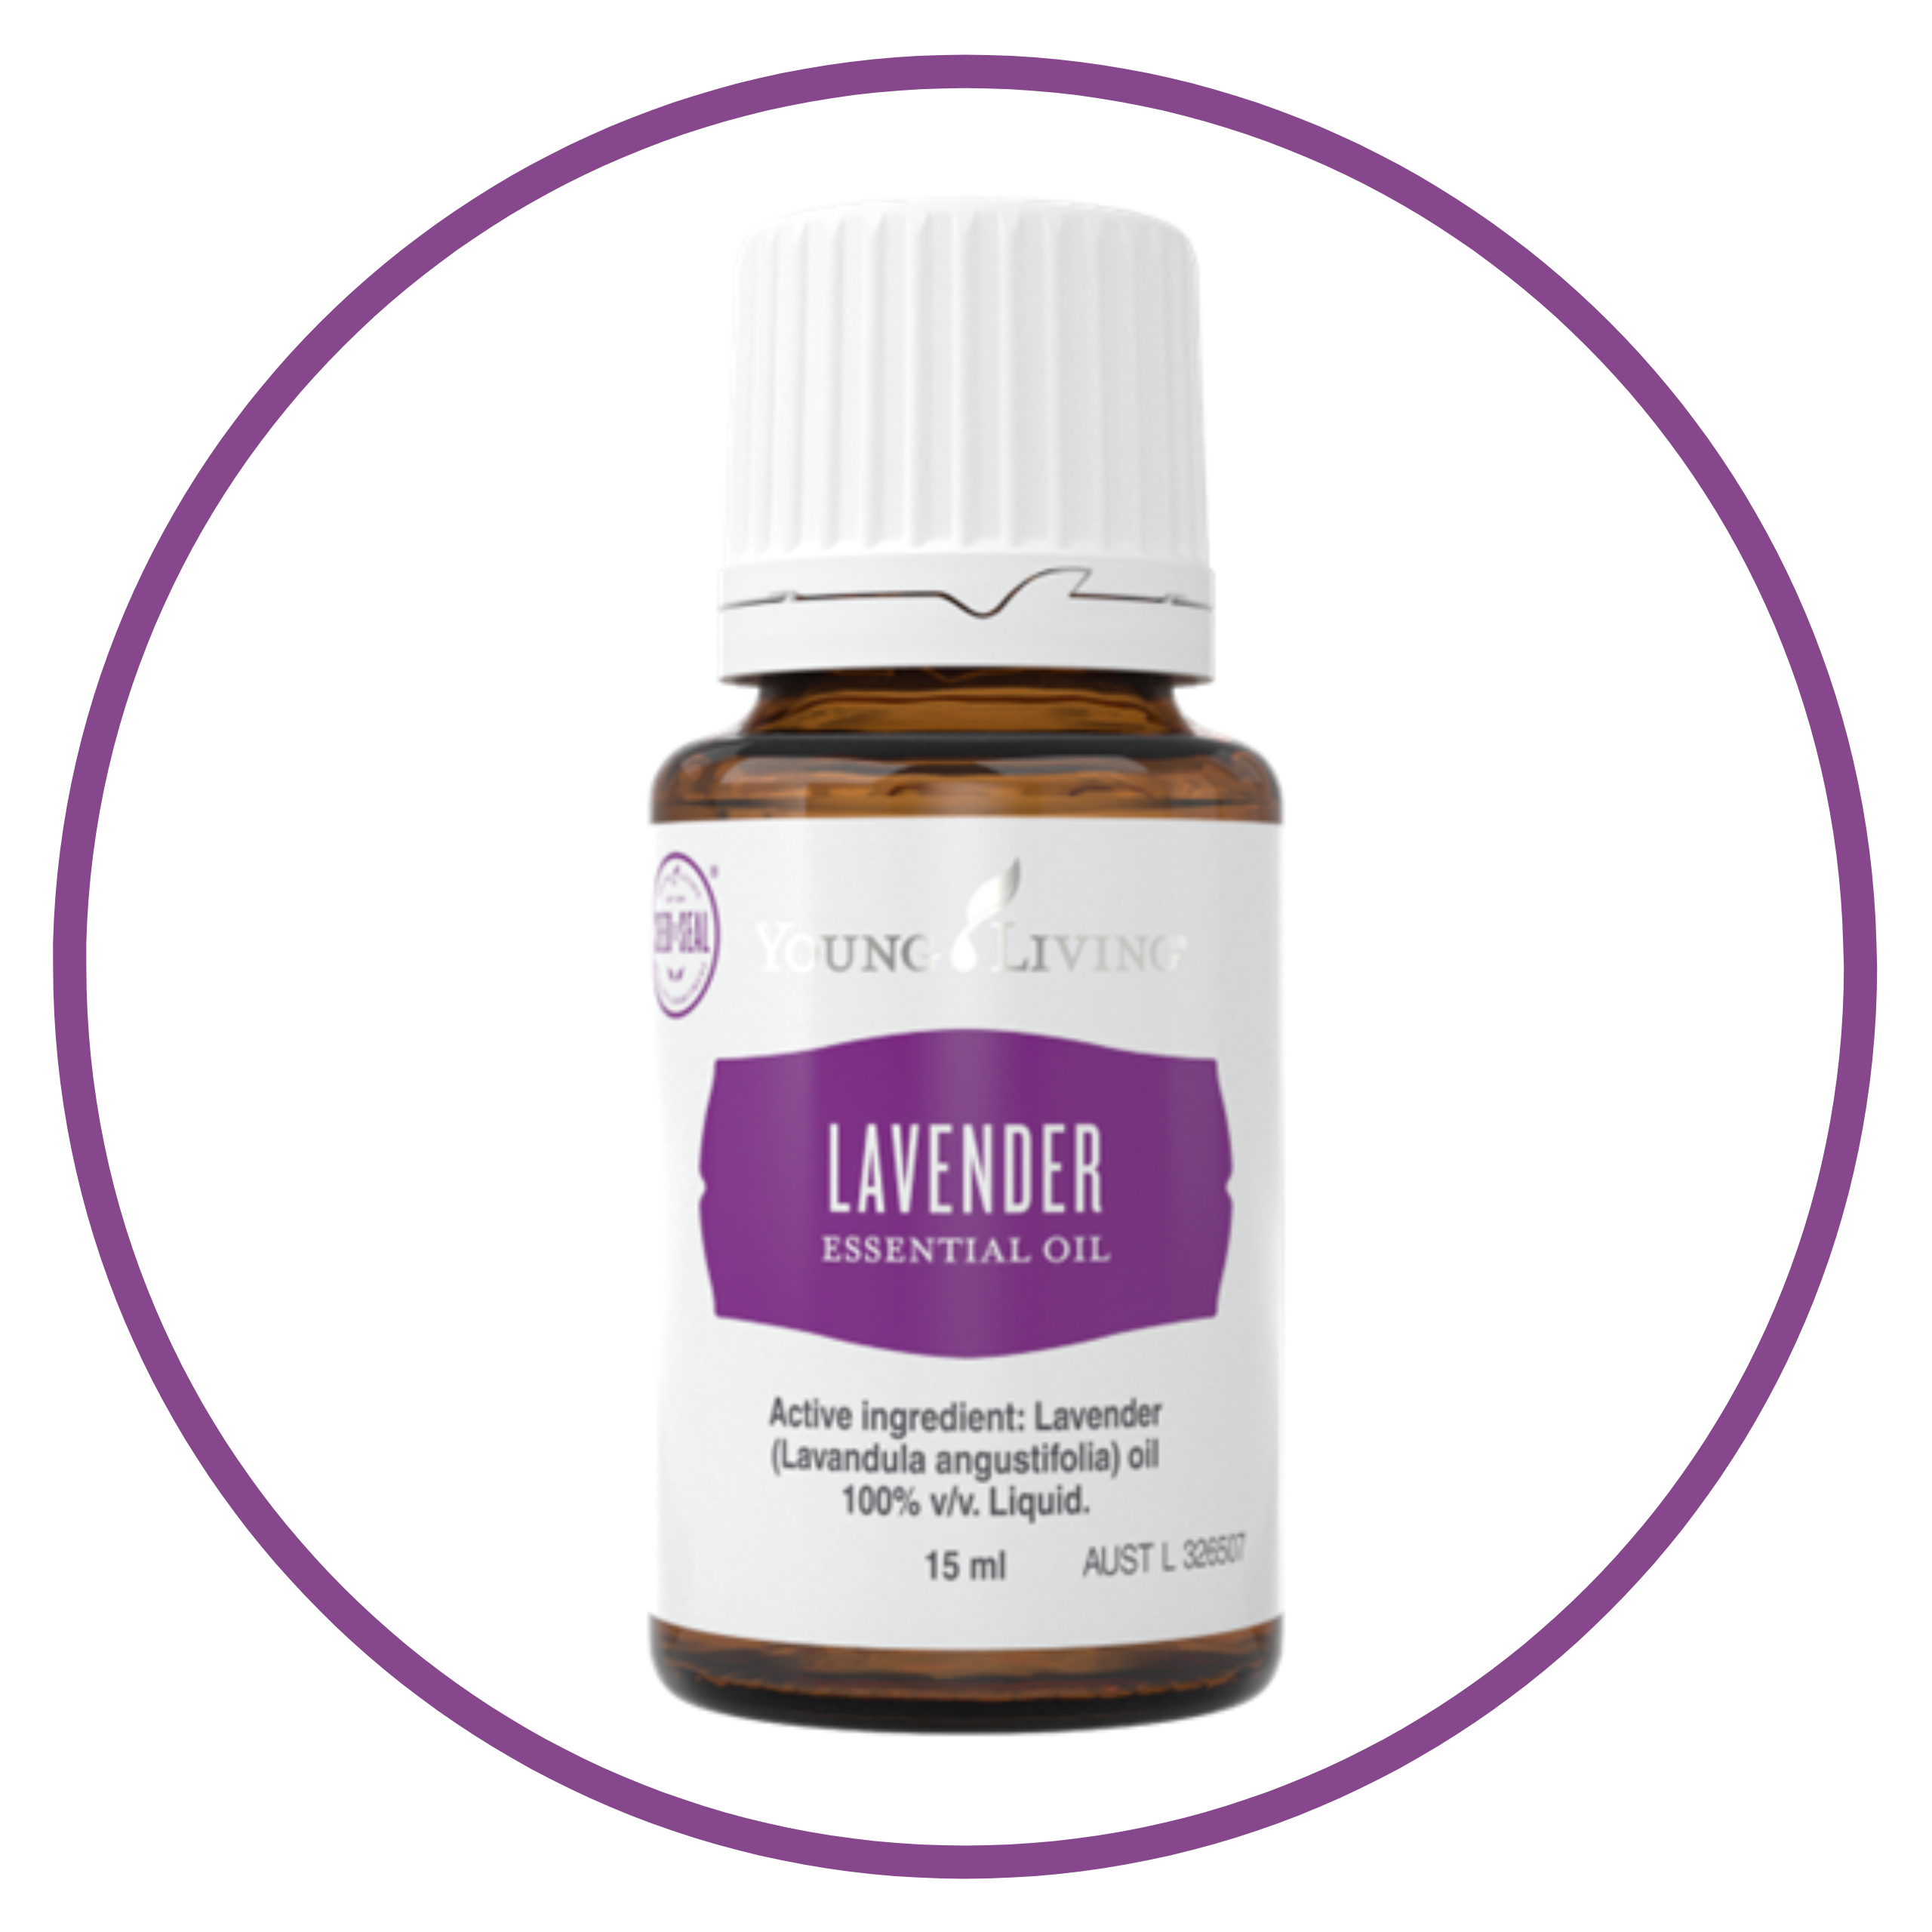 Image of Young Living 'lavender' essential oil bottle